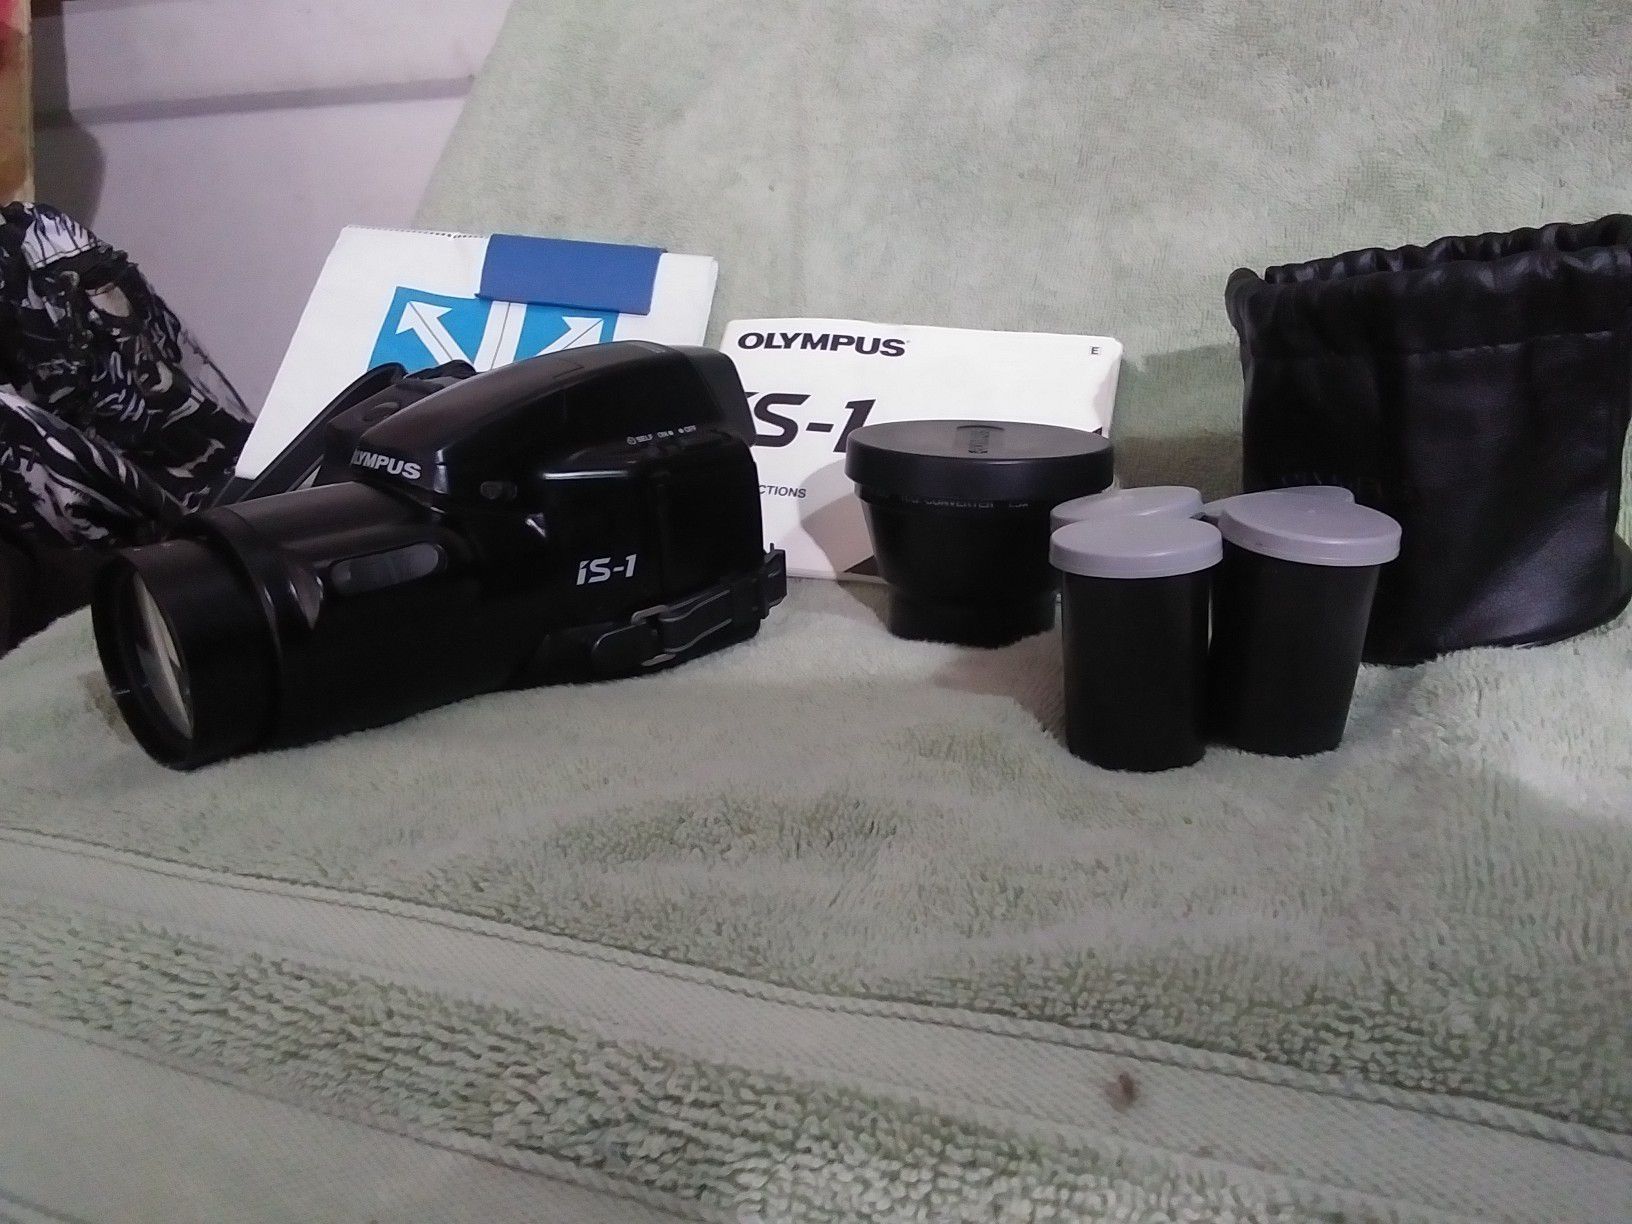 Olympus i.s. 1 camera, zoom lens, 3 films in case and bag